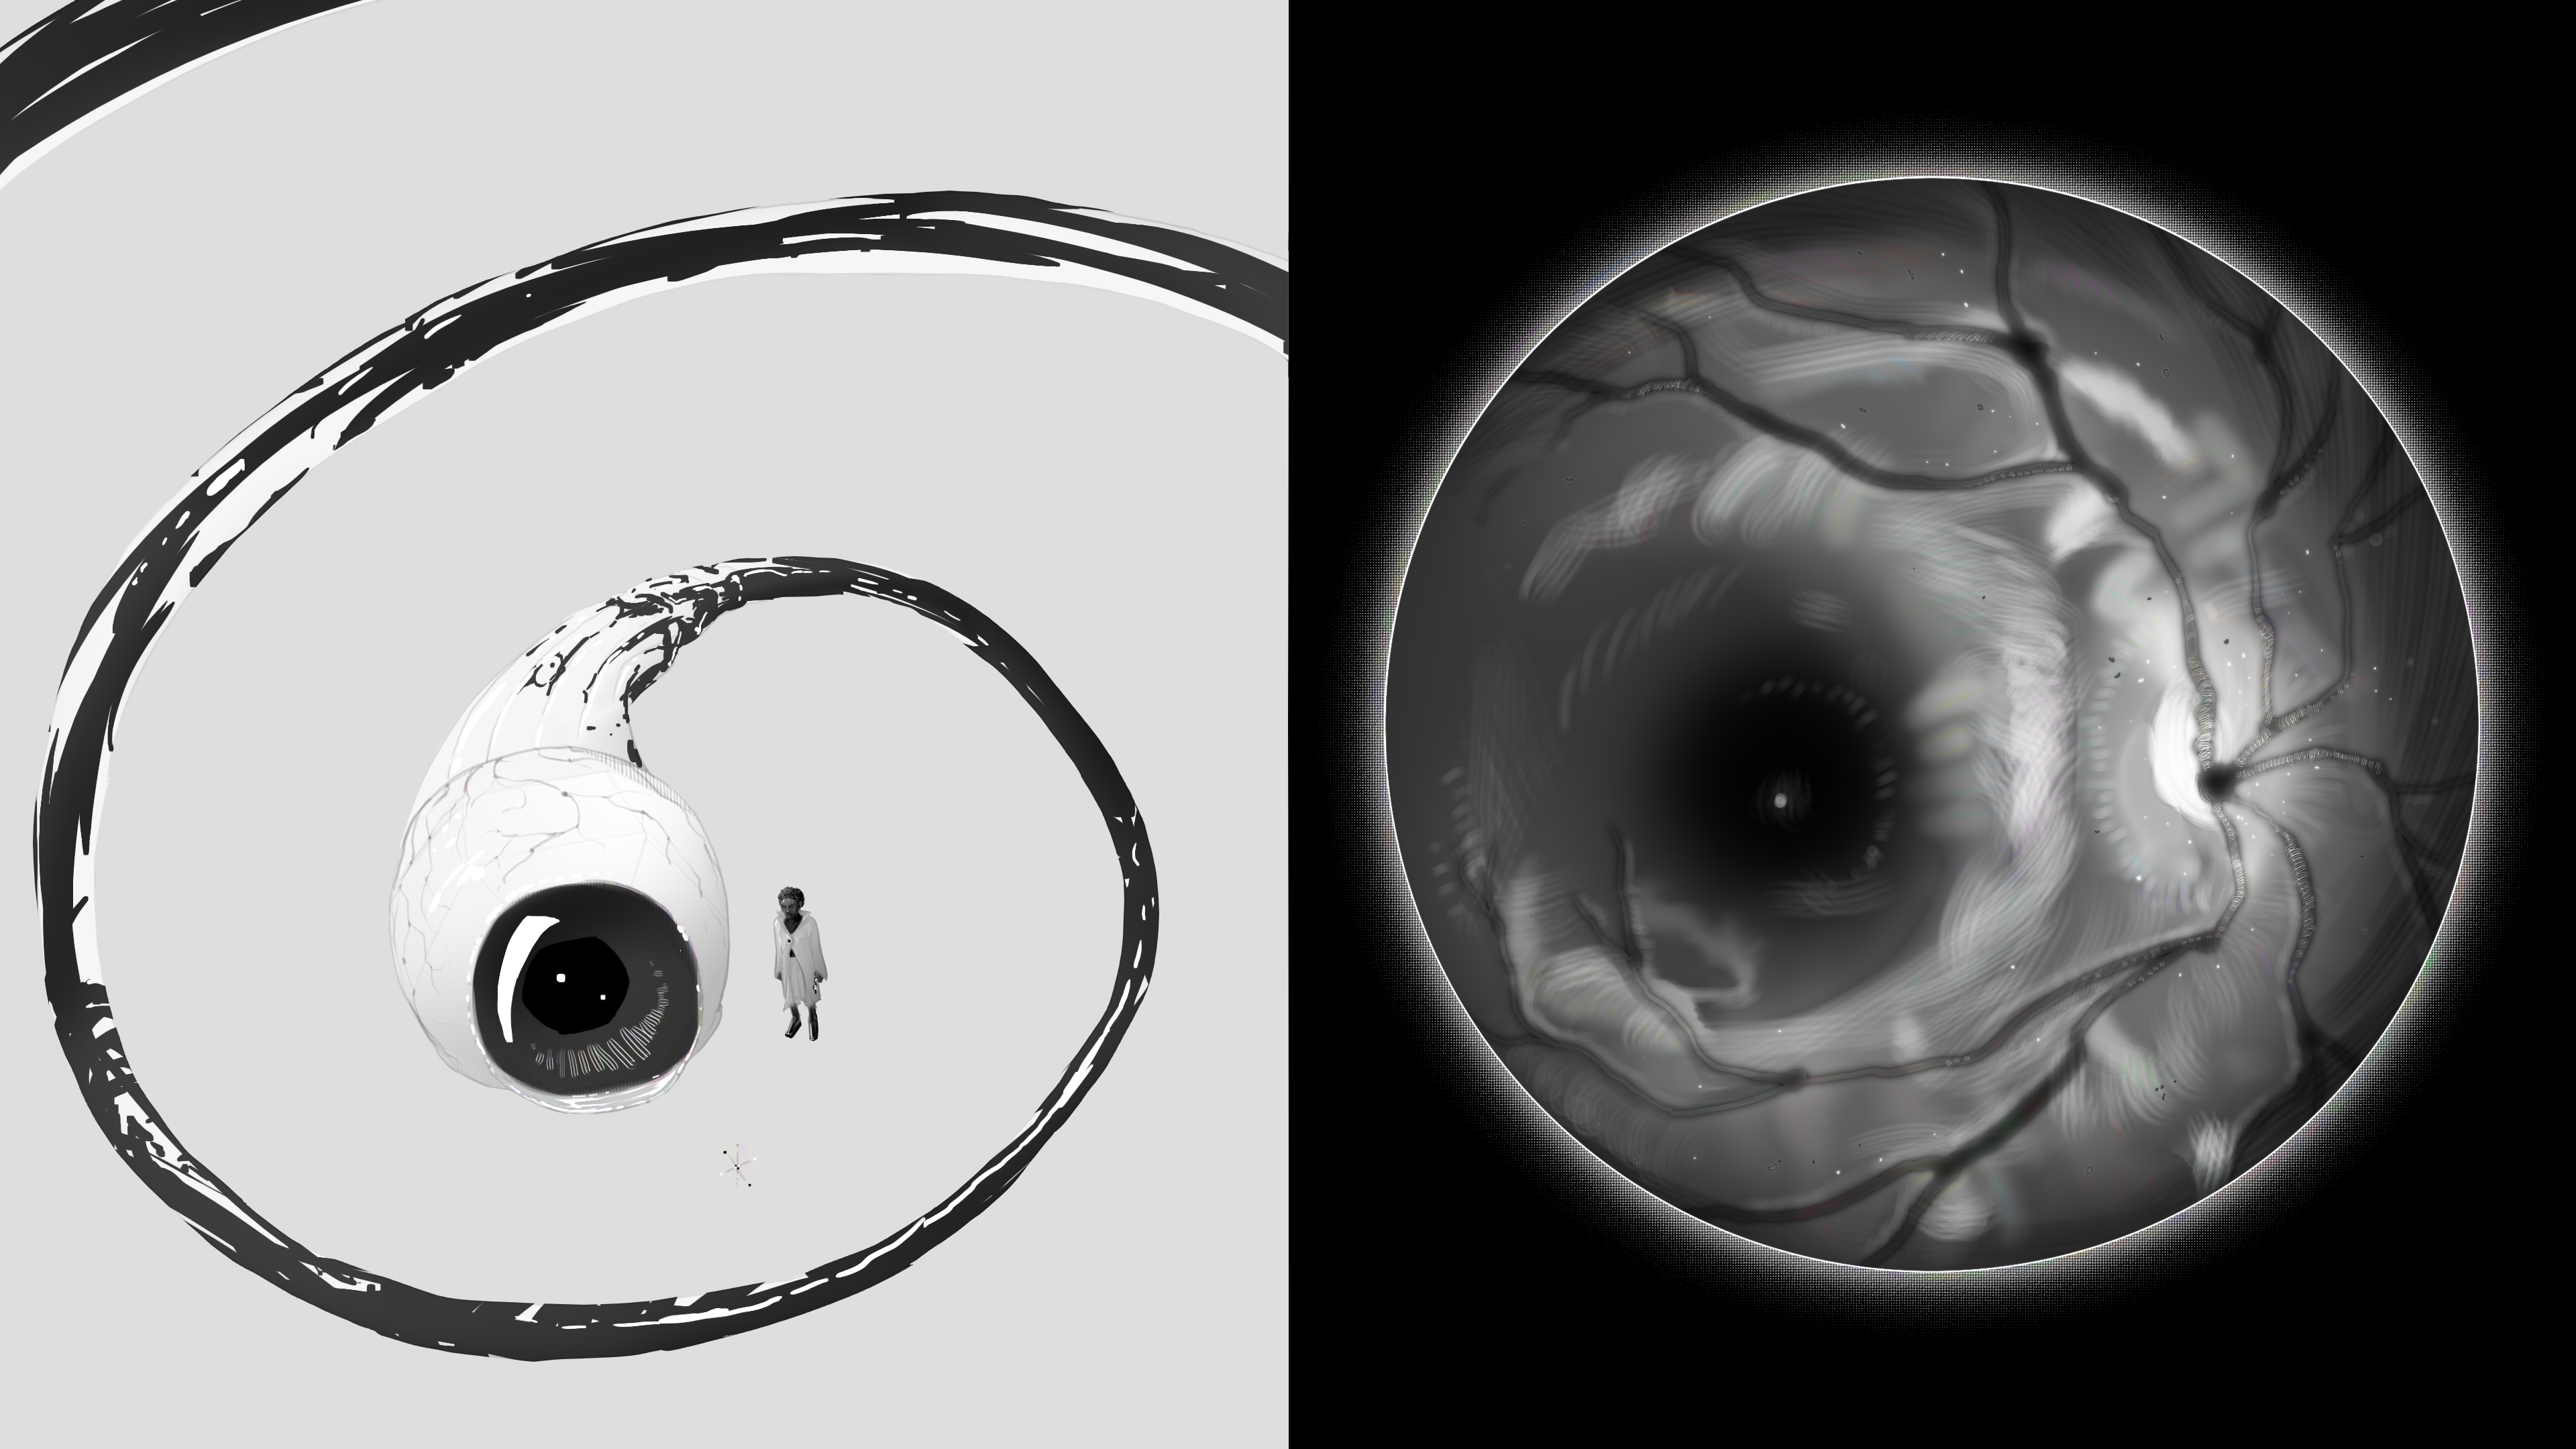 Two pictures: One is of a person standing next to a human-sized eye, and the other is of a lightly cloudy sky with veins.